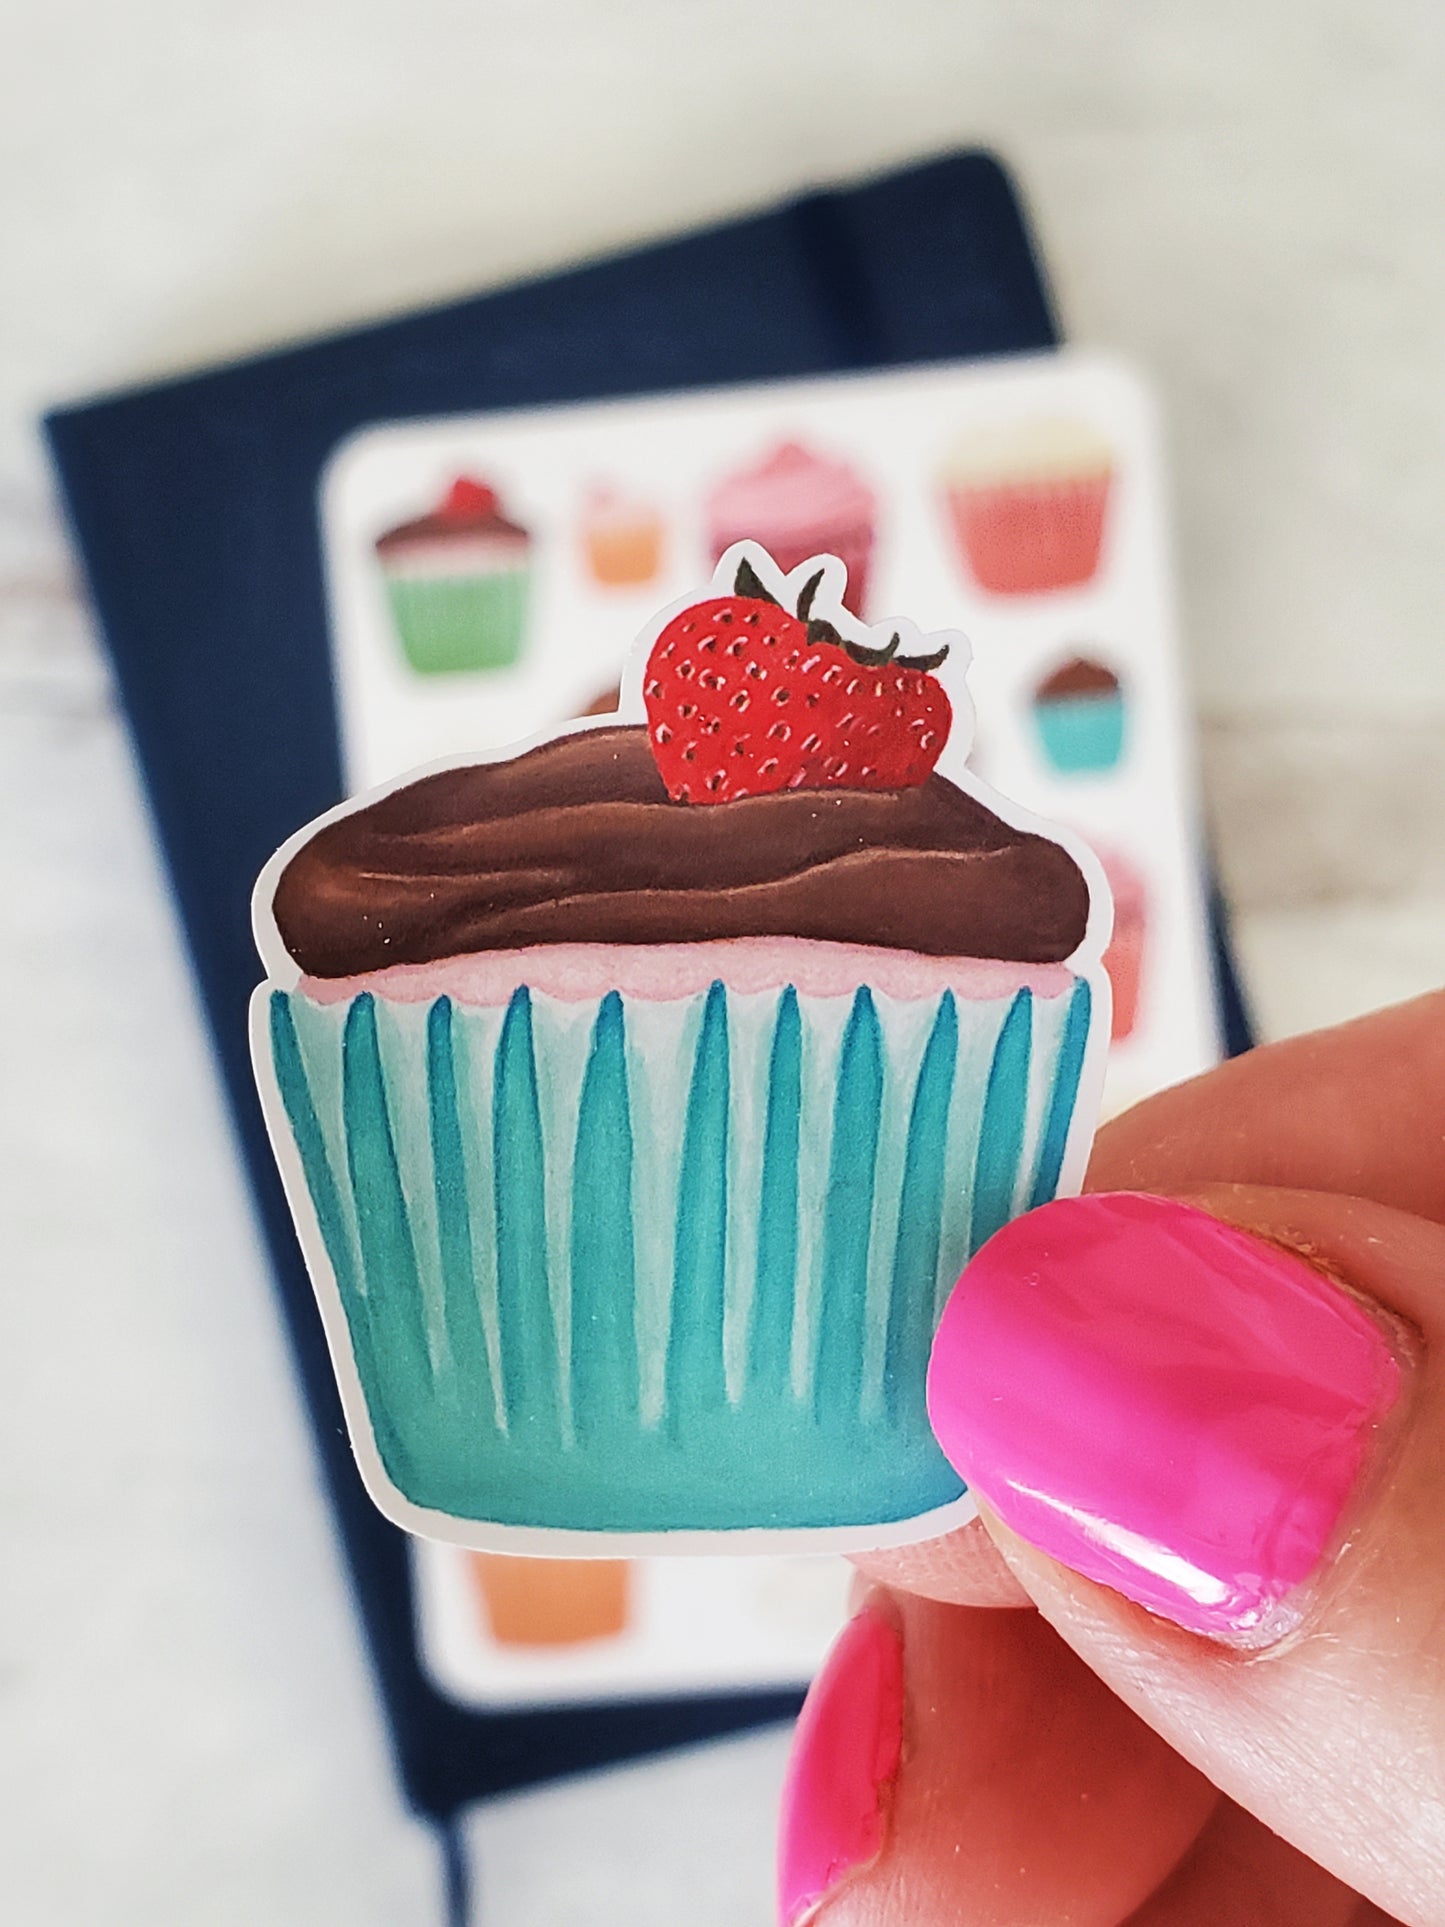 A close up of the chocolate frosted strawberry cupcake to show the highly detailed, bold style.